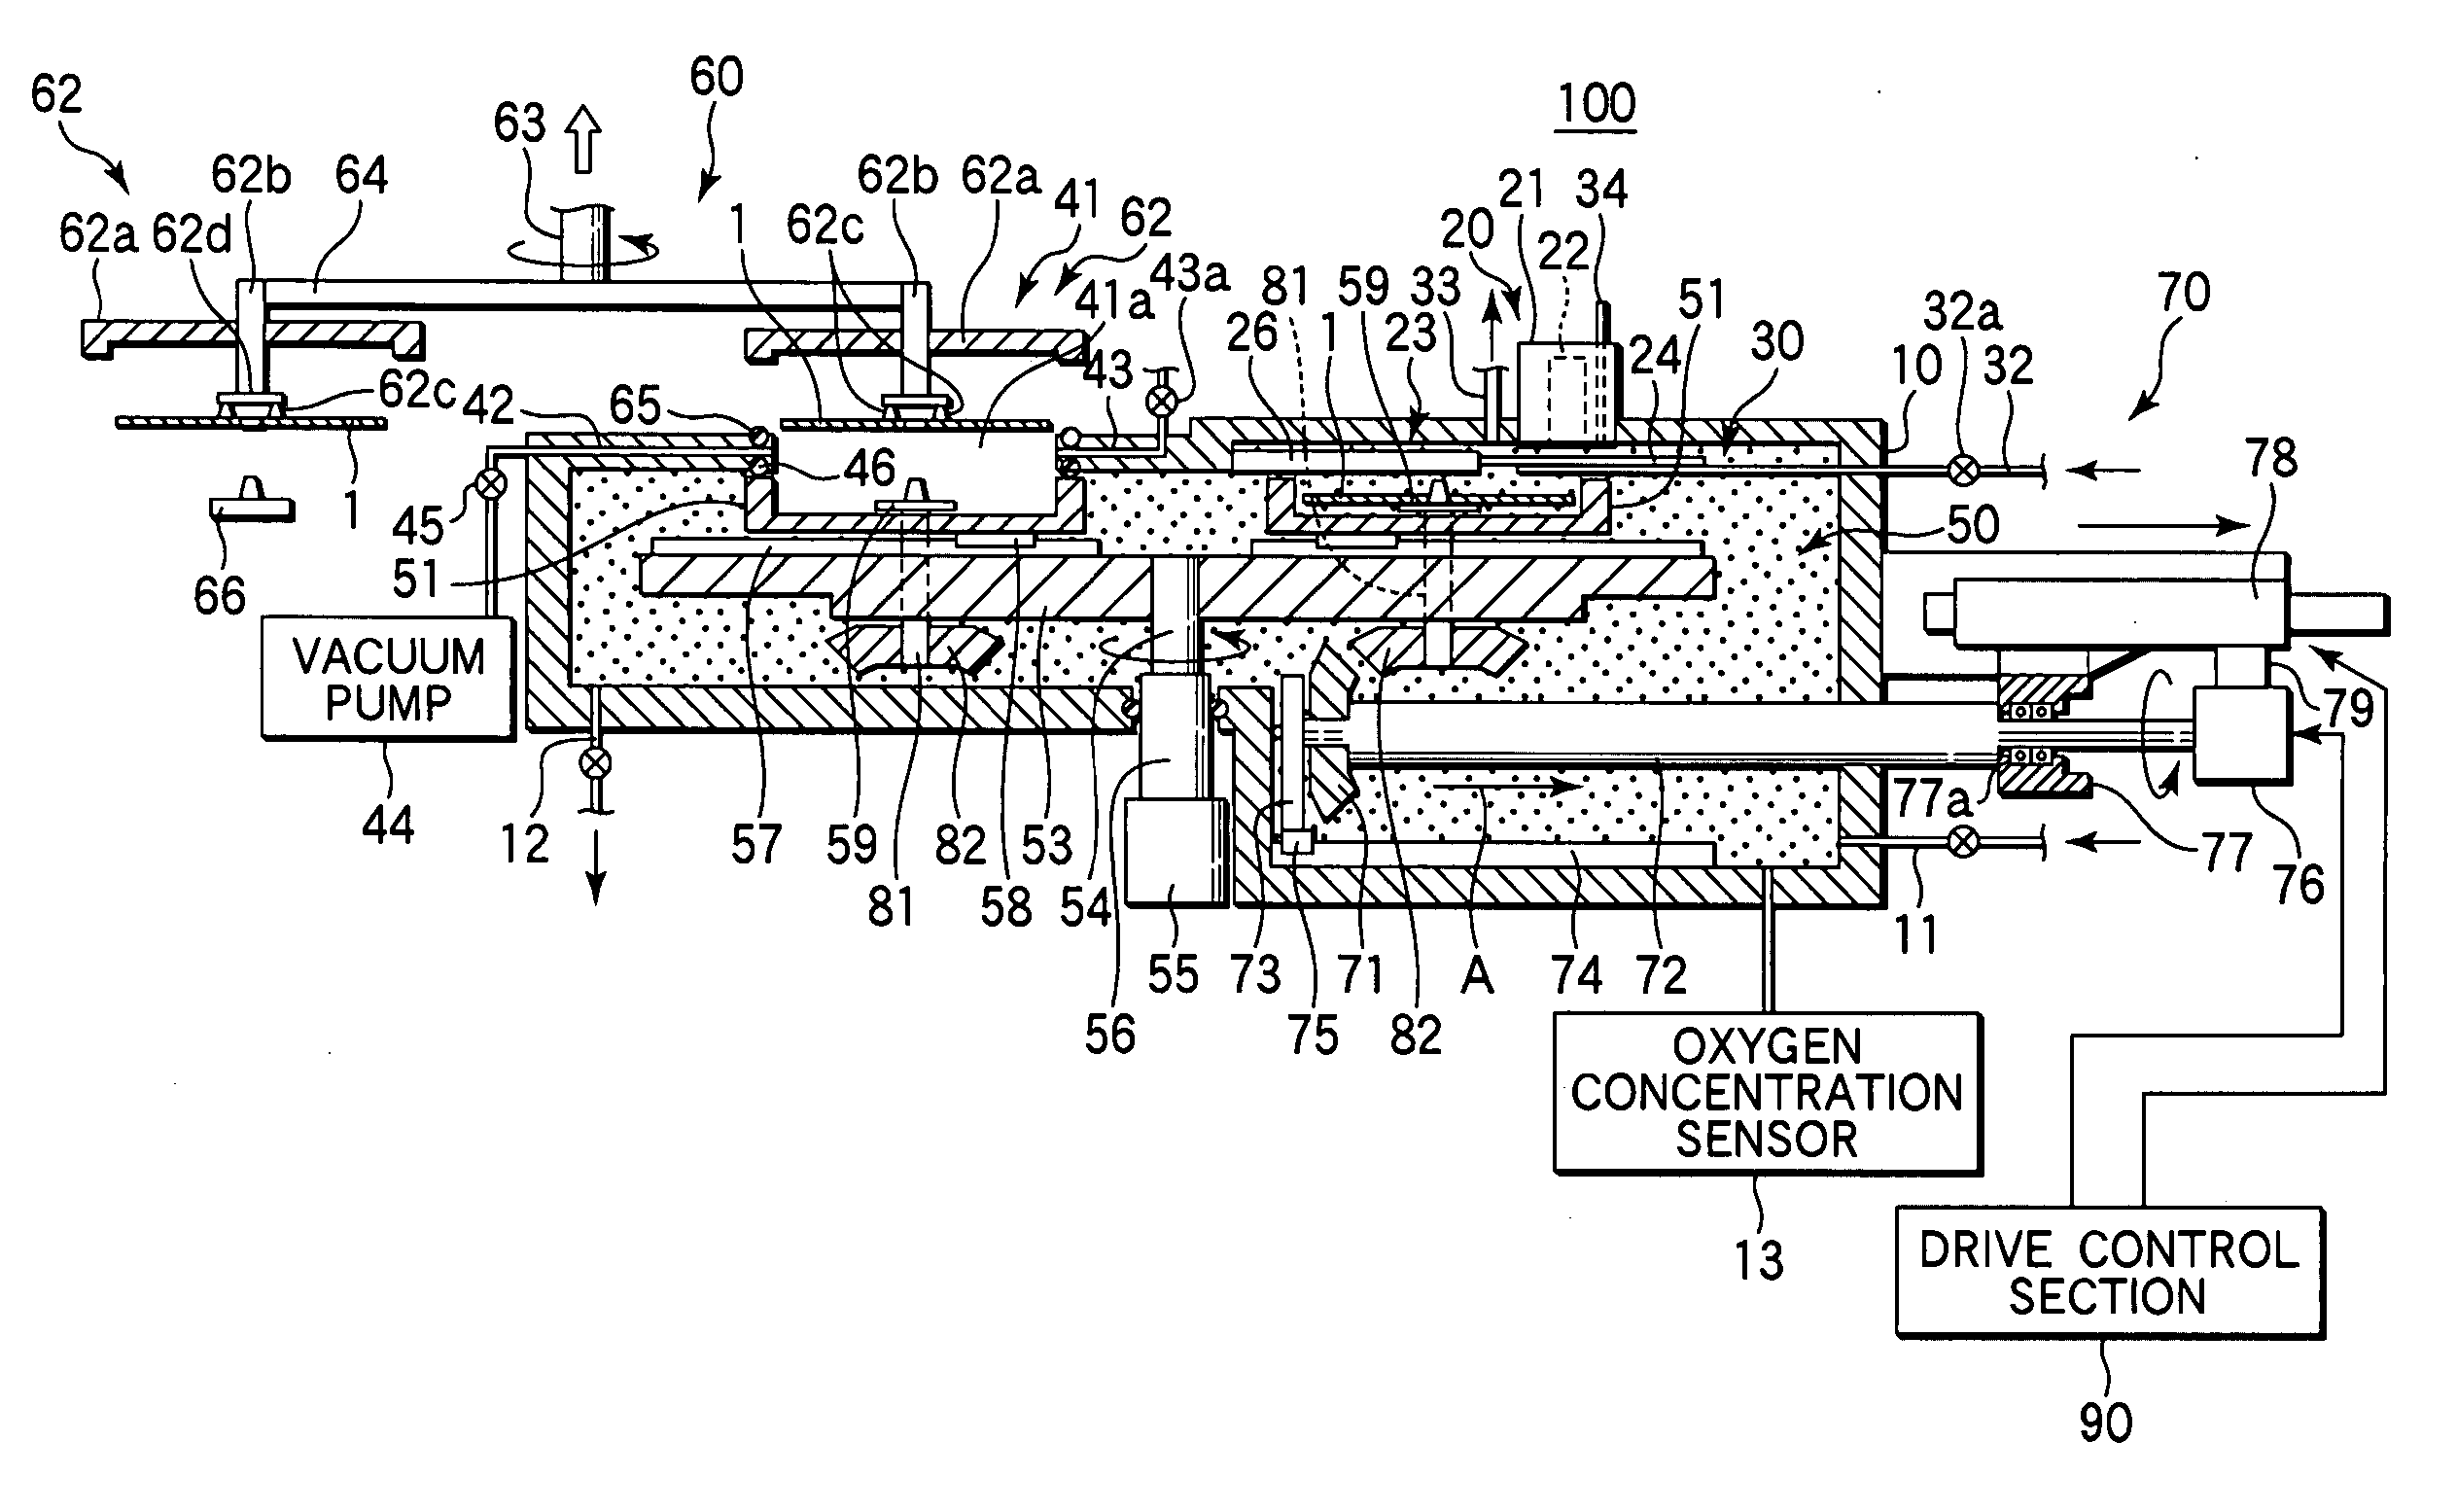 Apparatus and method for irradiating electron beam